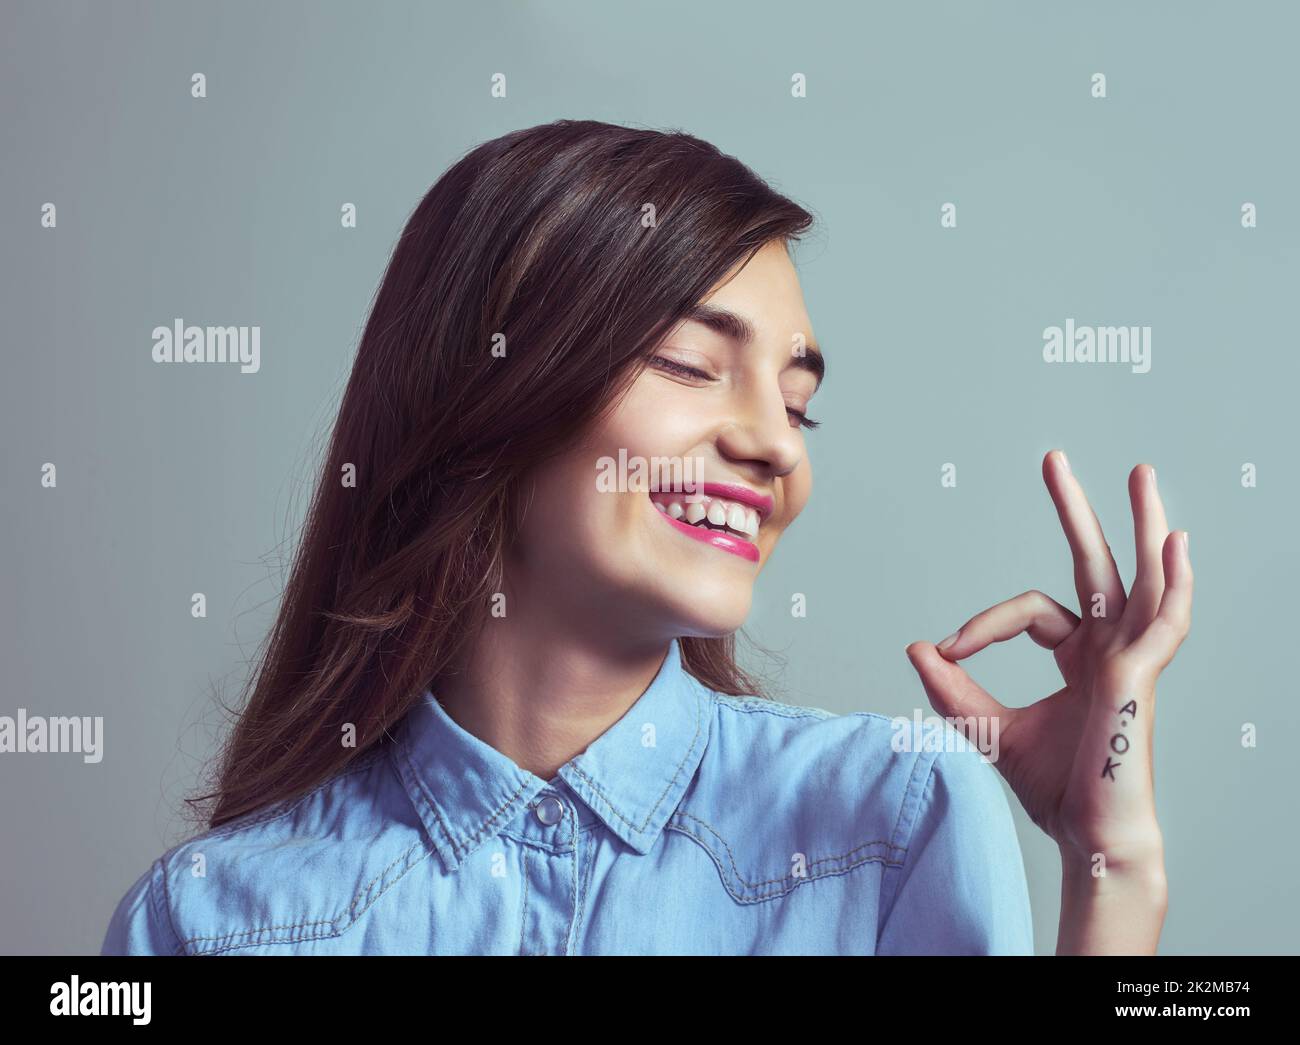 Everything is a-okay. Studio shot of an attractive young woman making an a-okay sign with her hand against a grey background. Stock Photo